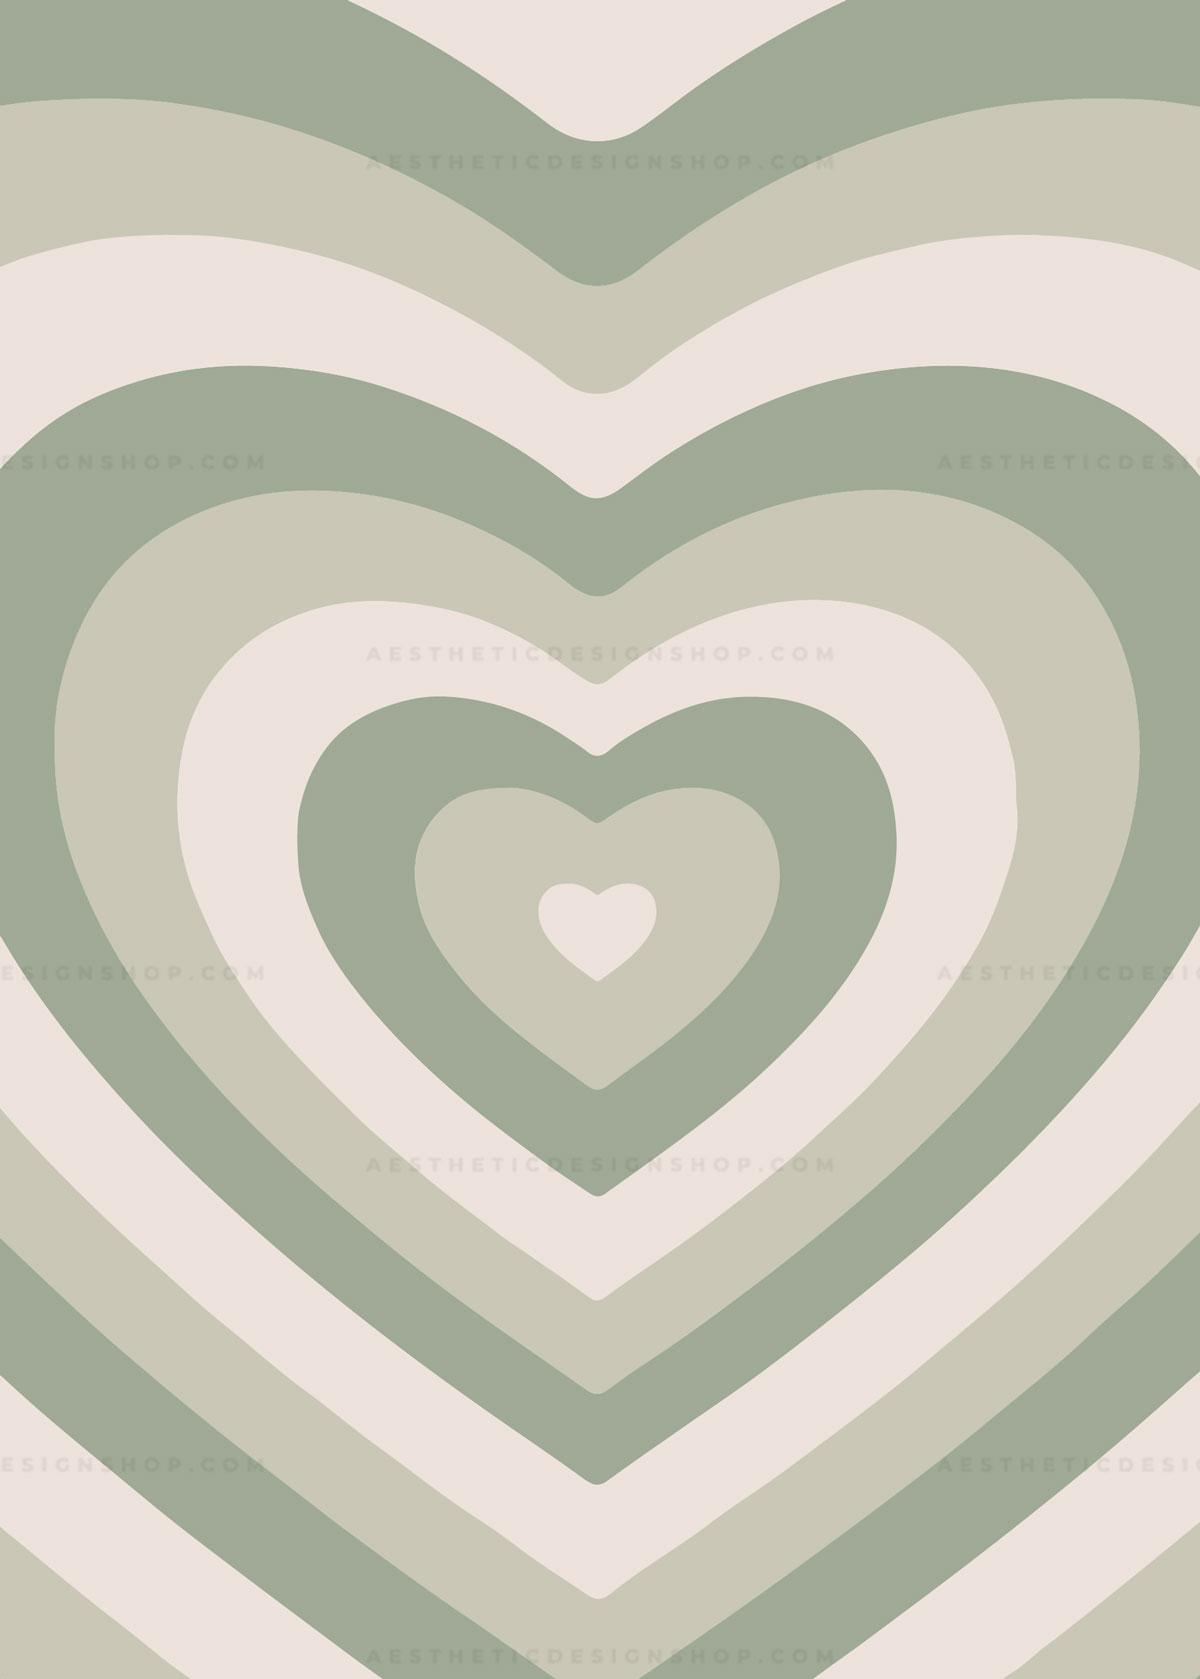 20 Sage Green Aesthetic Wallpaper Backgrounds FREE